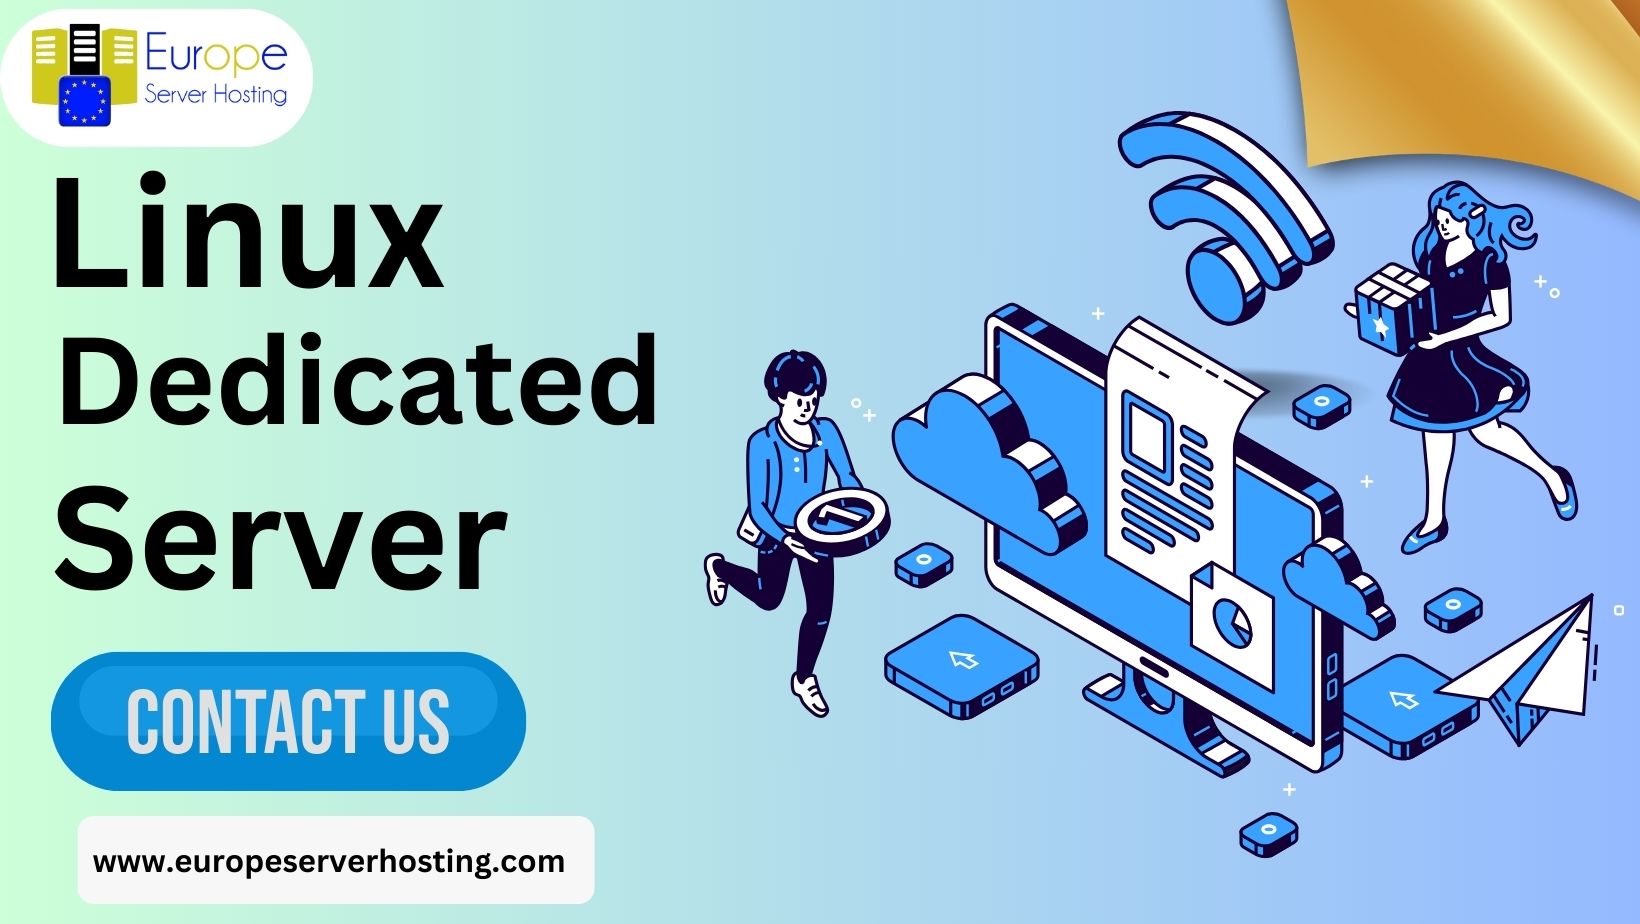 A Linux dedicated server is a hosting solution where an entire physical server is exclusively dedicated to one client or organization. Unlike shared hosting, where multiple users share server resources, dedicated servers offer unparalleled control, customization, and performance